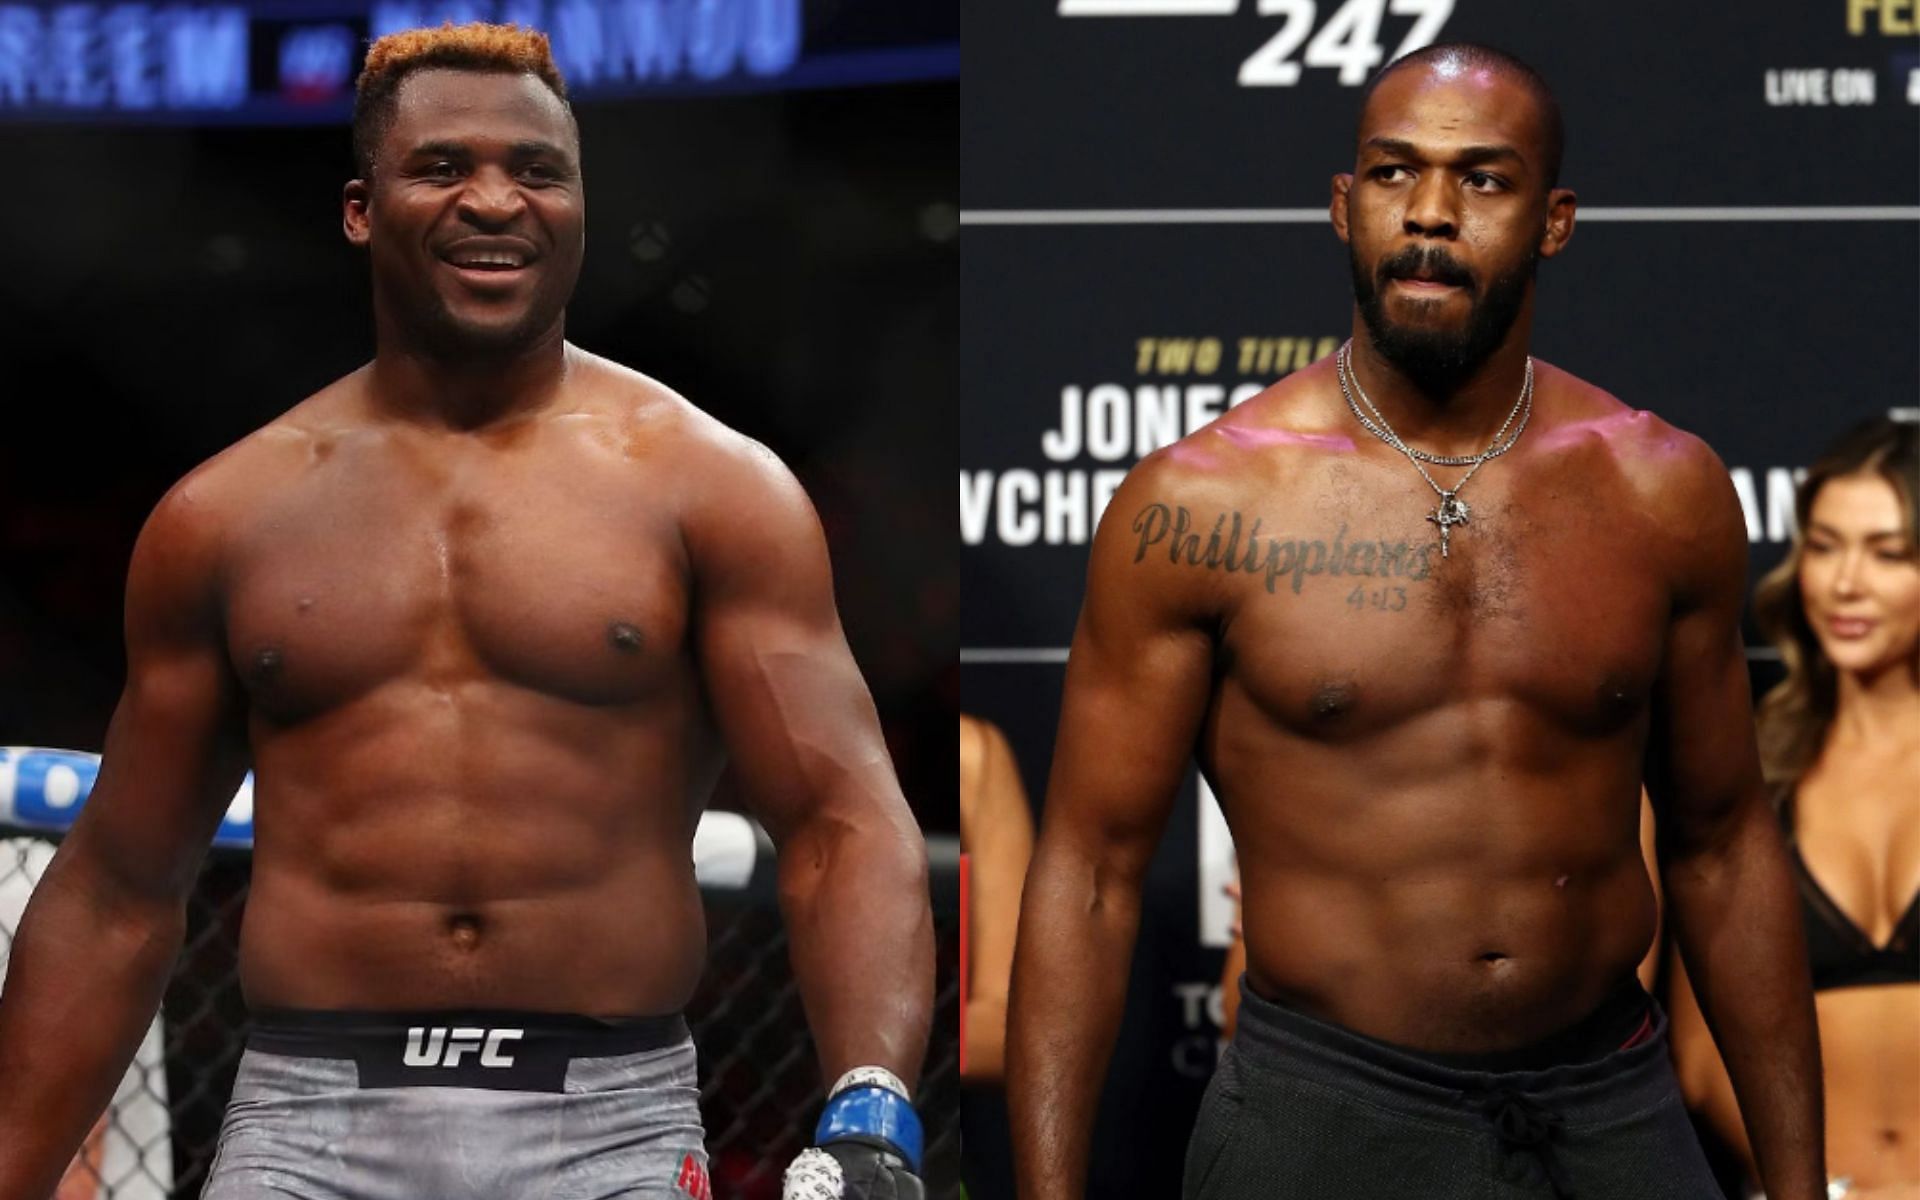 Jon Jones claims he was in a similar situation with the UFC as Francis Ngannou, but took a different call